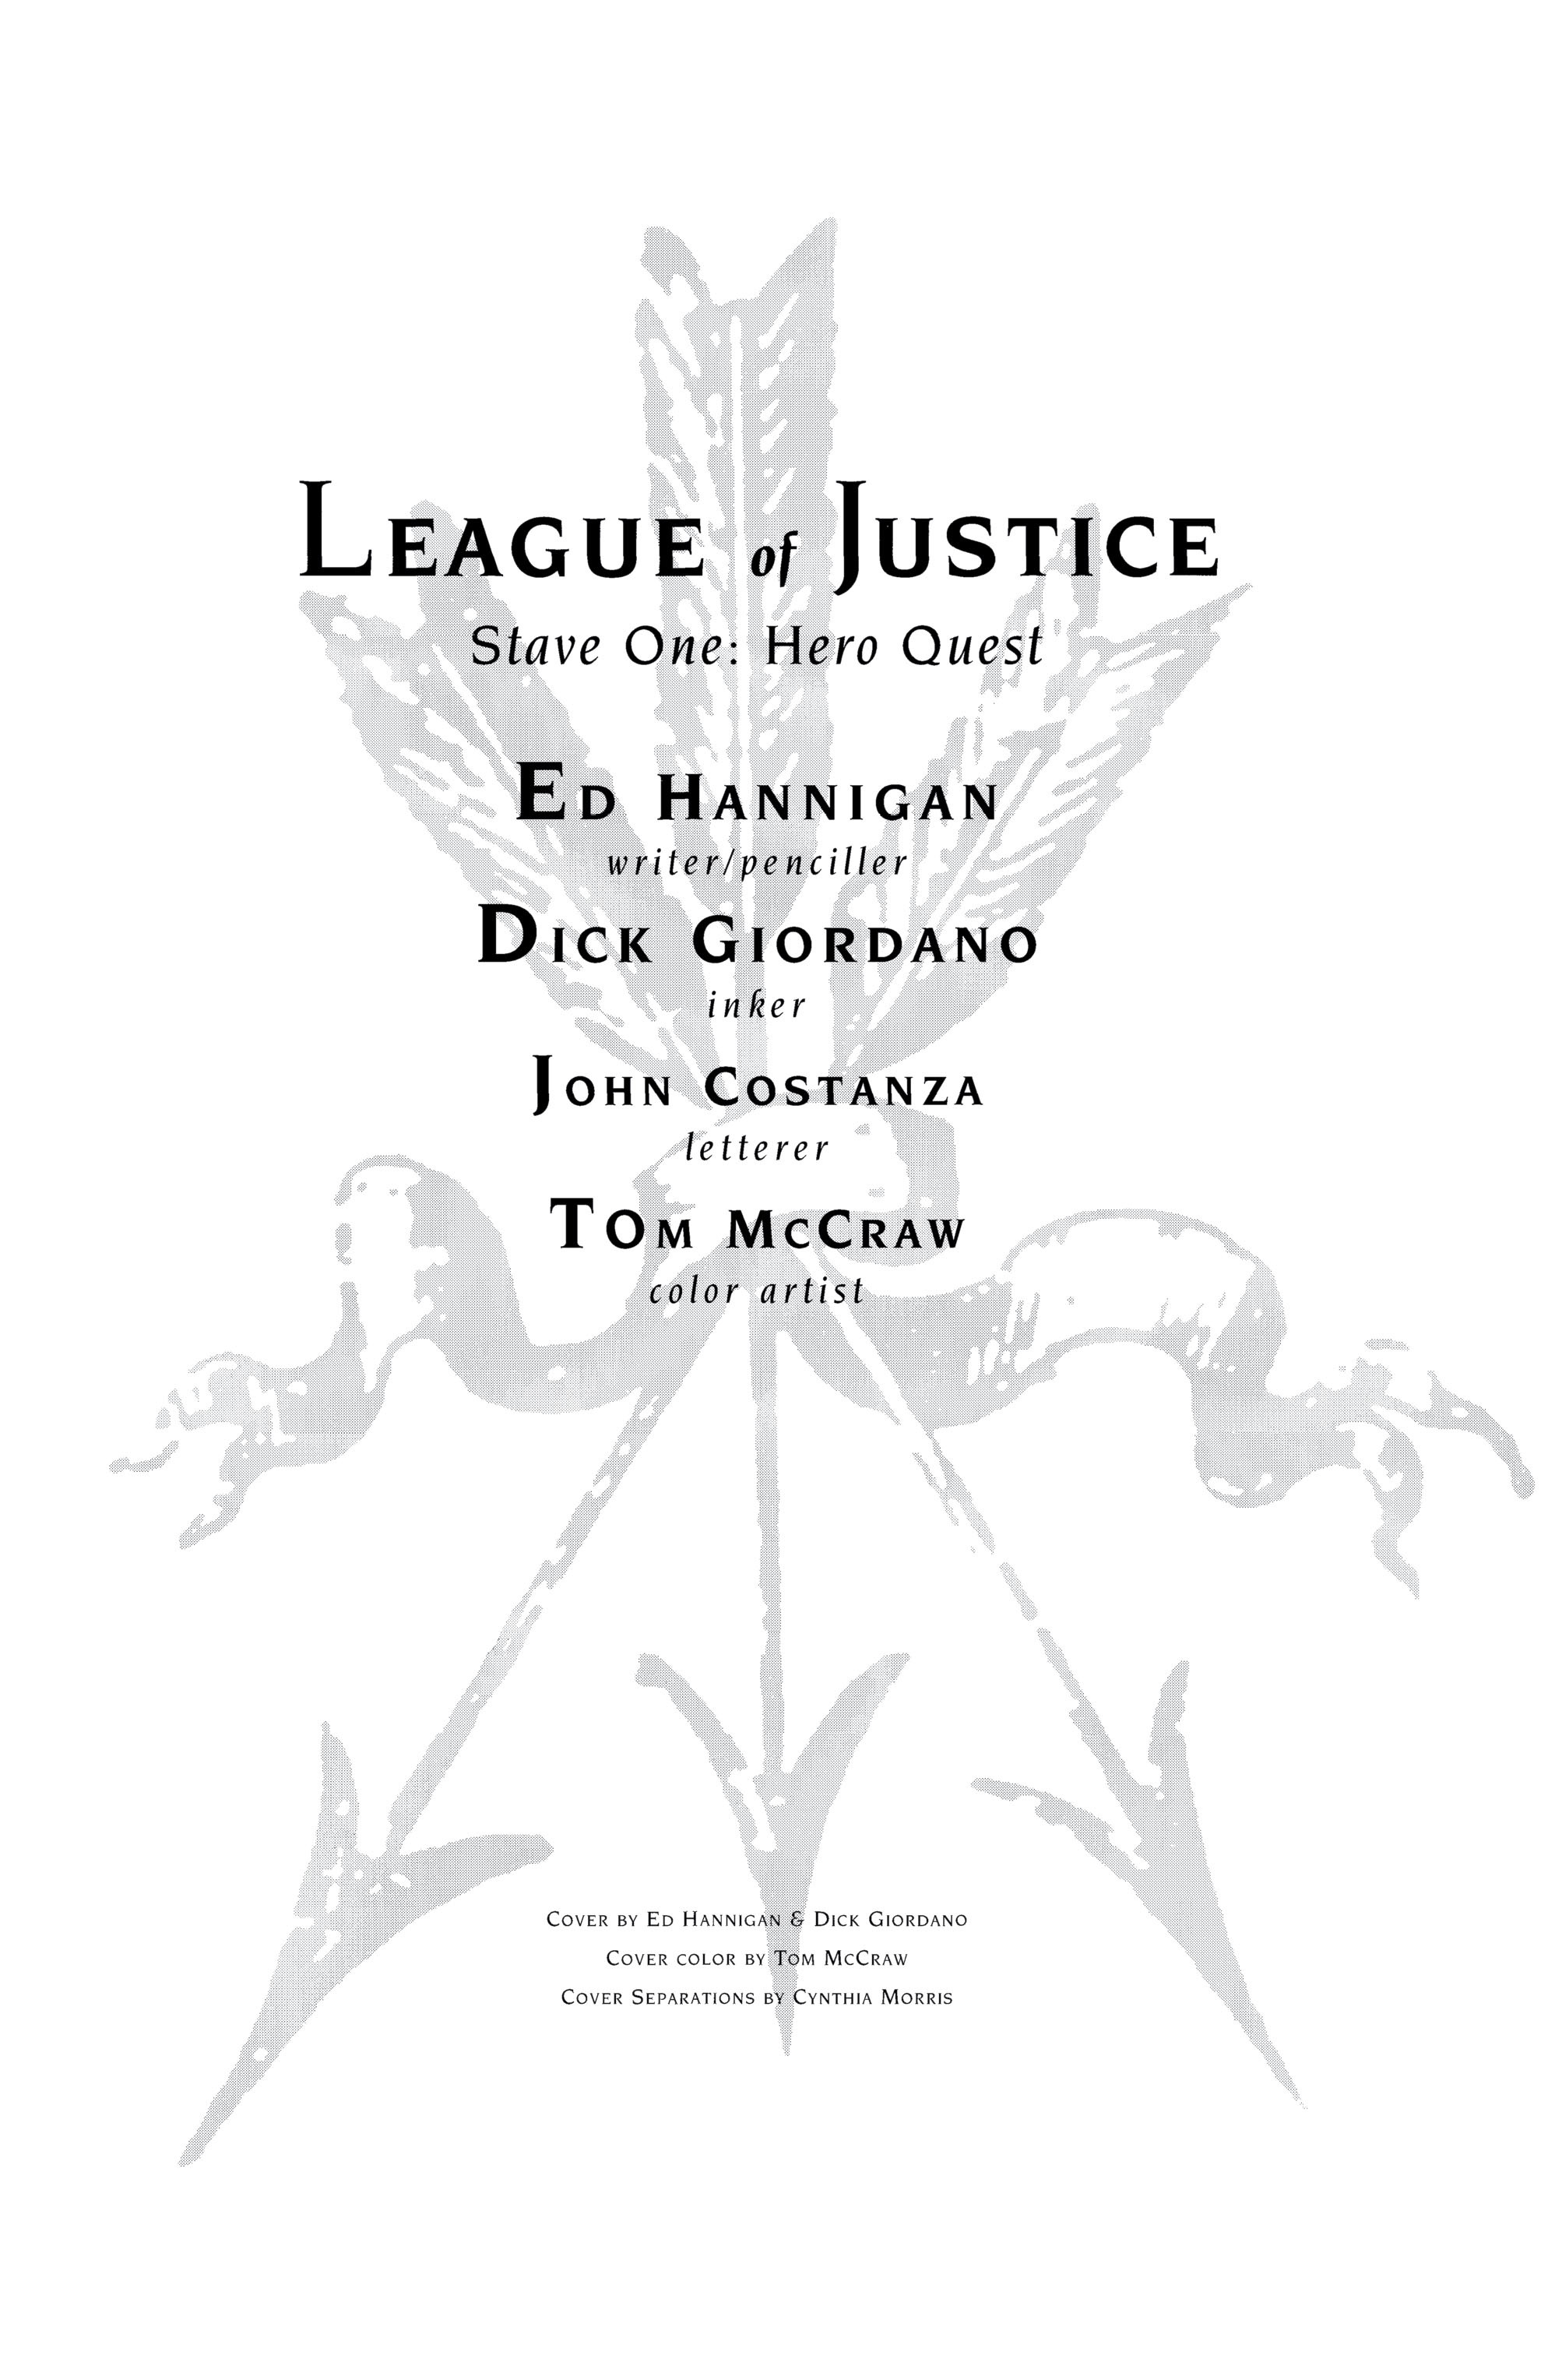 Read online League of Justice comic -  Issue #1 - 3